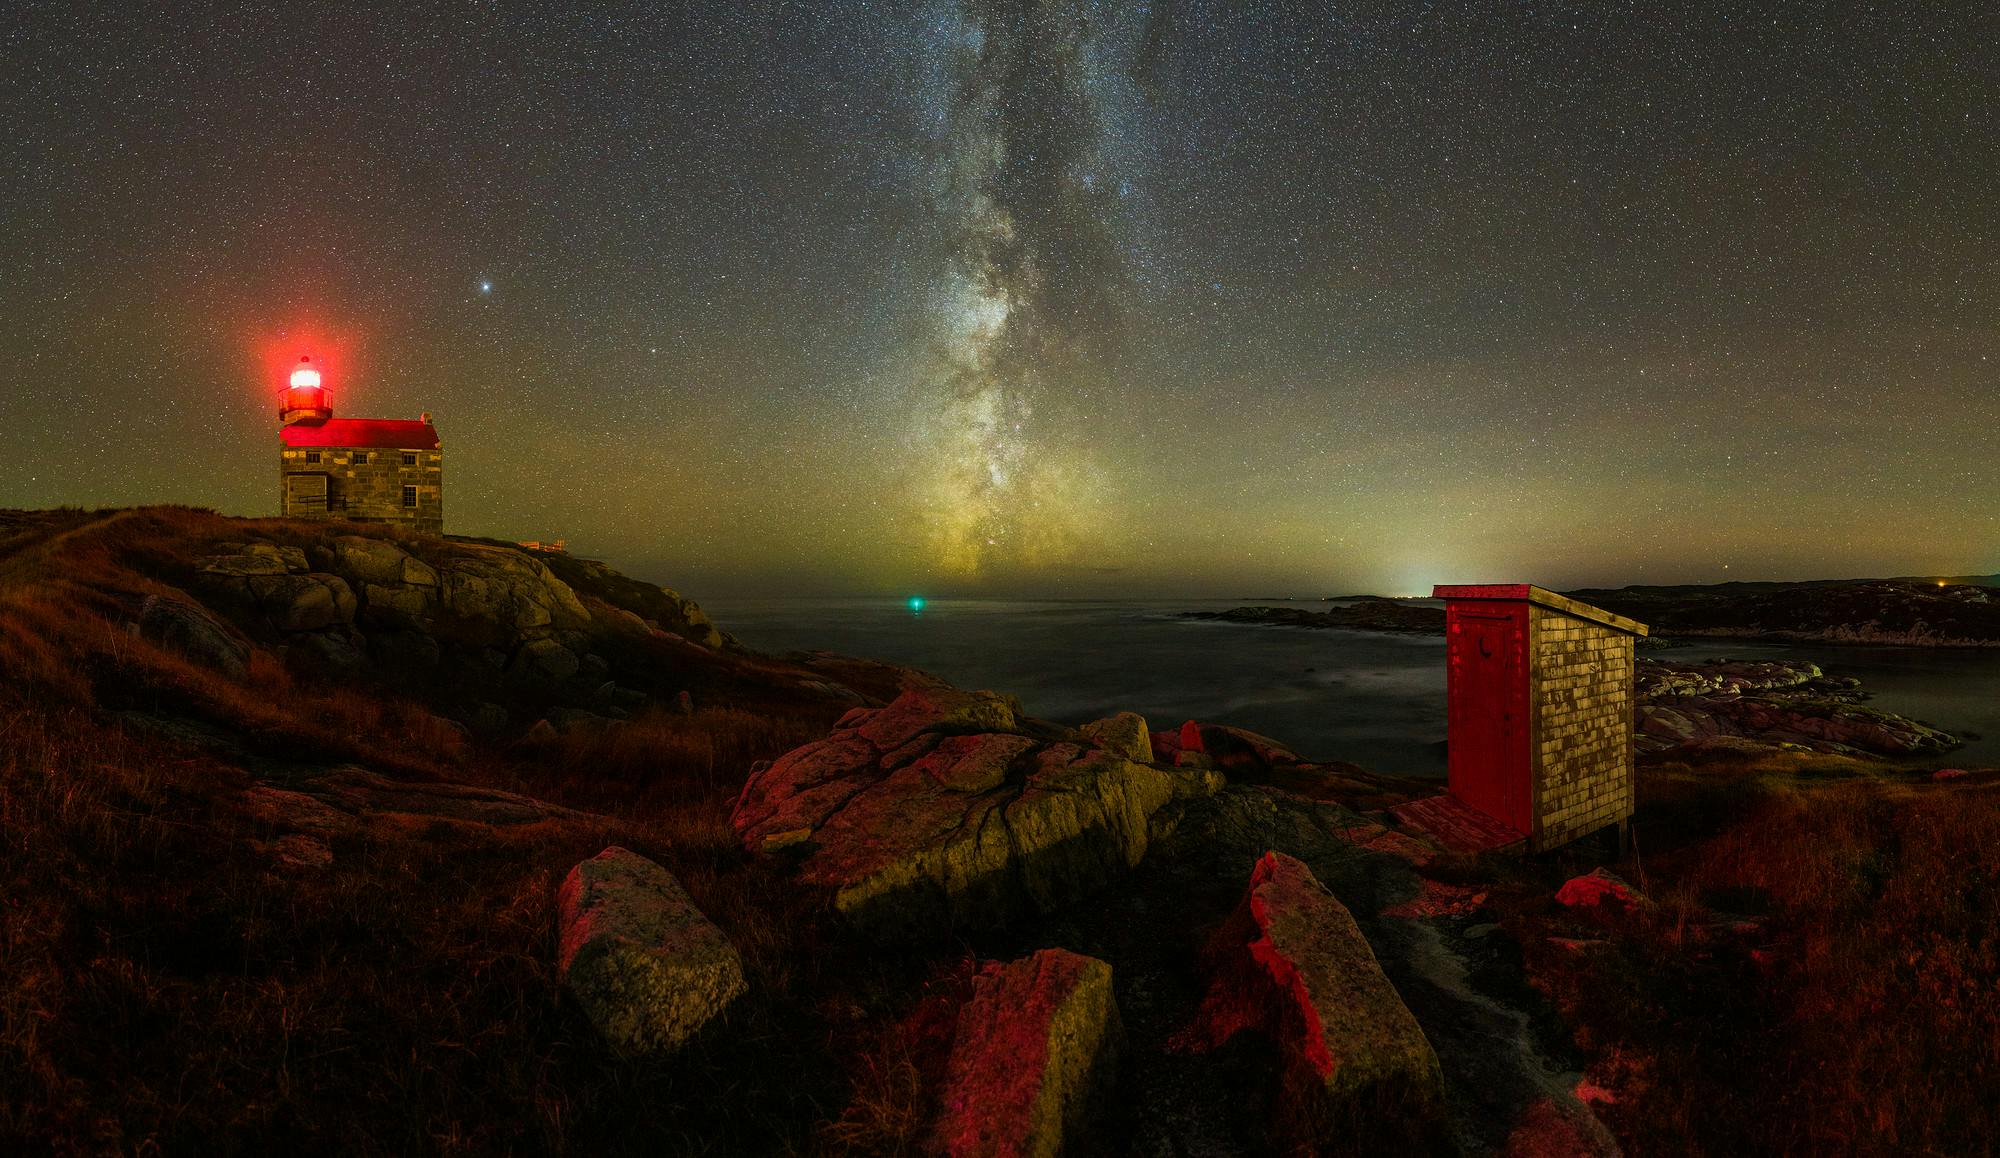 Milky Way at Rose-Blanche Lighthouse and Outhouse